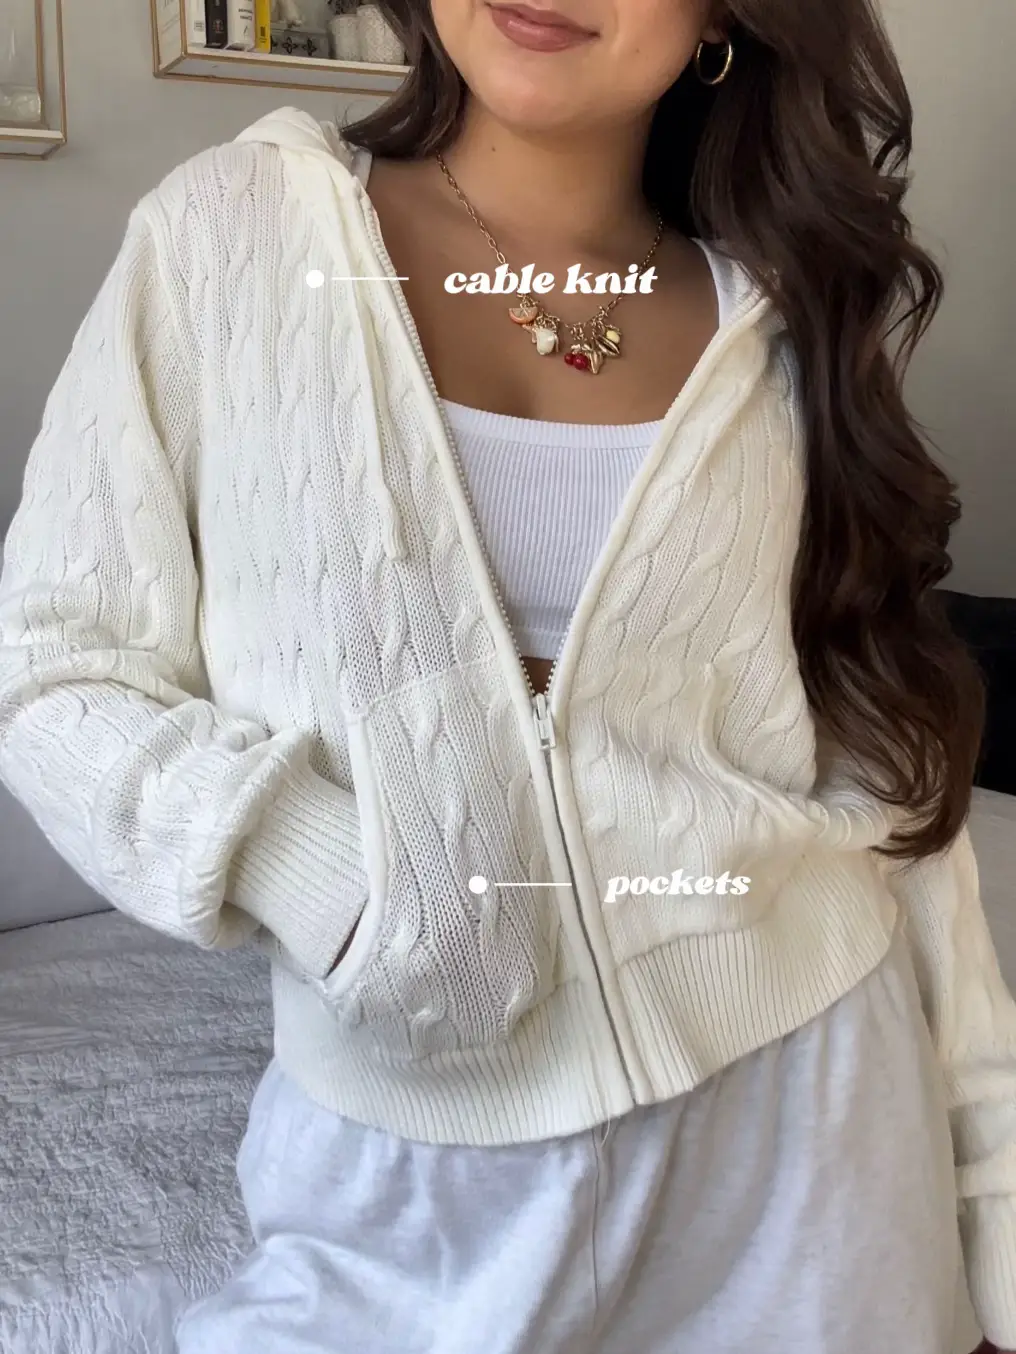 Aleah Sweater  Brandy Melville Womens Sweaters - The Wooden Nest